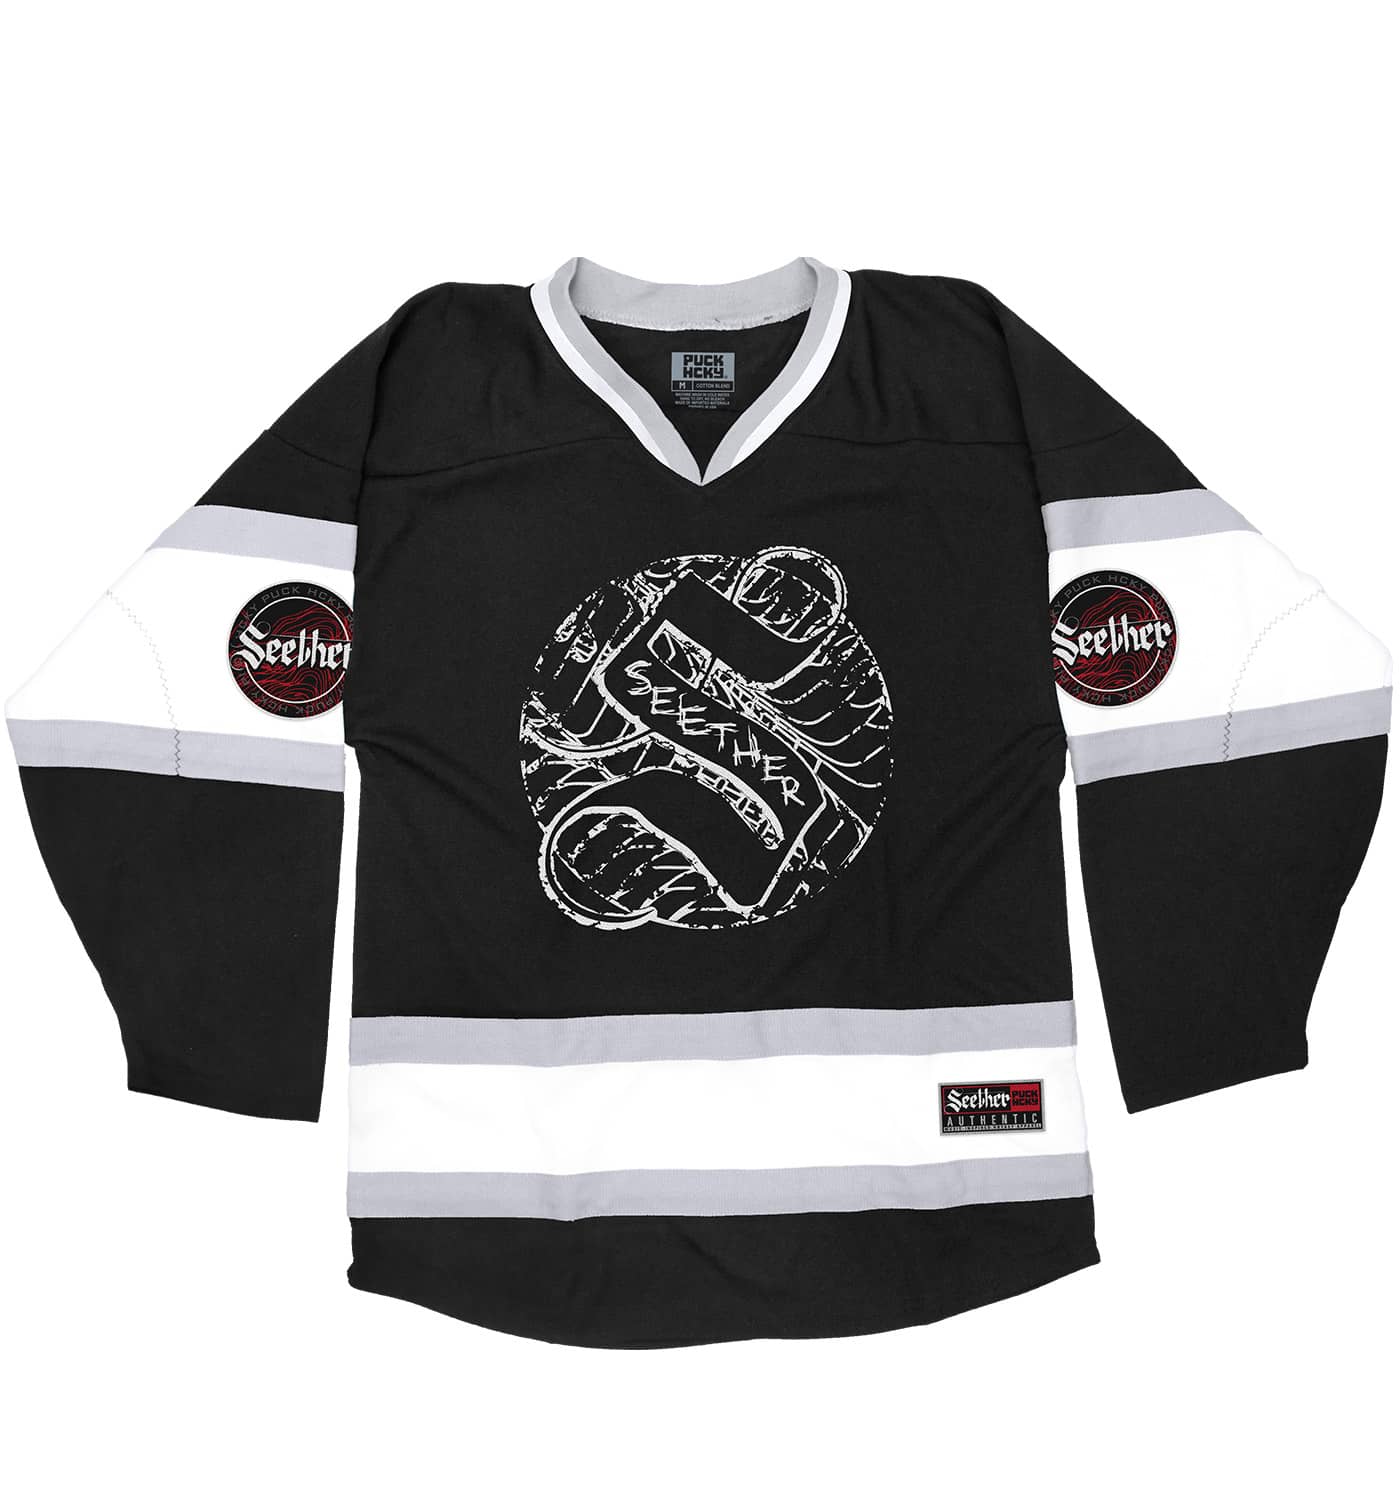 SEETHER 'THE S' hockey jersey in black, white, and grey front view